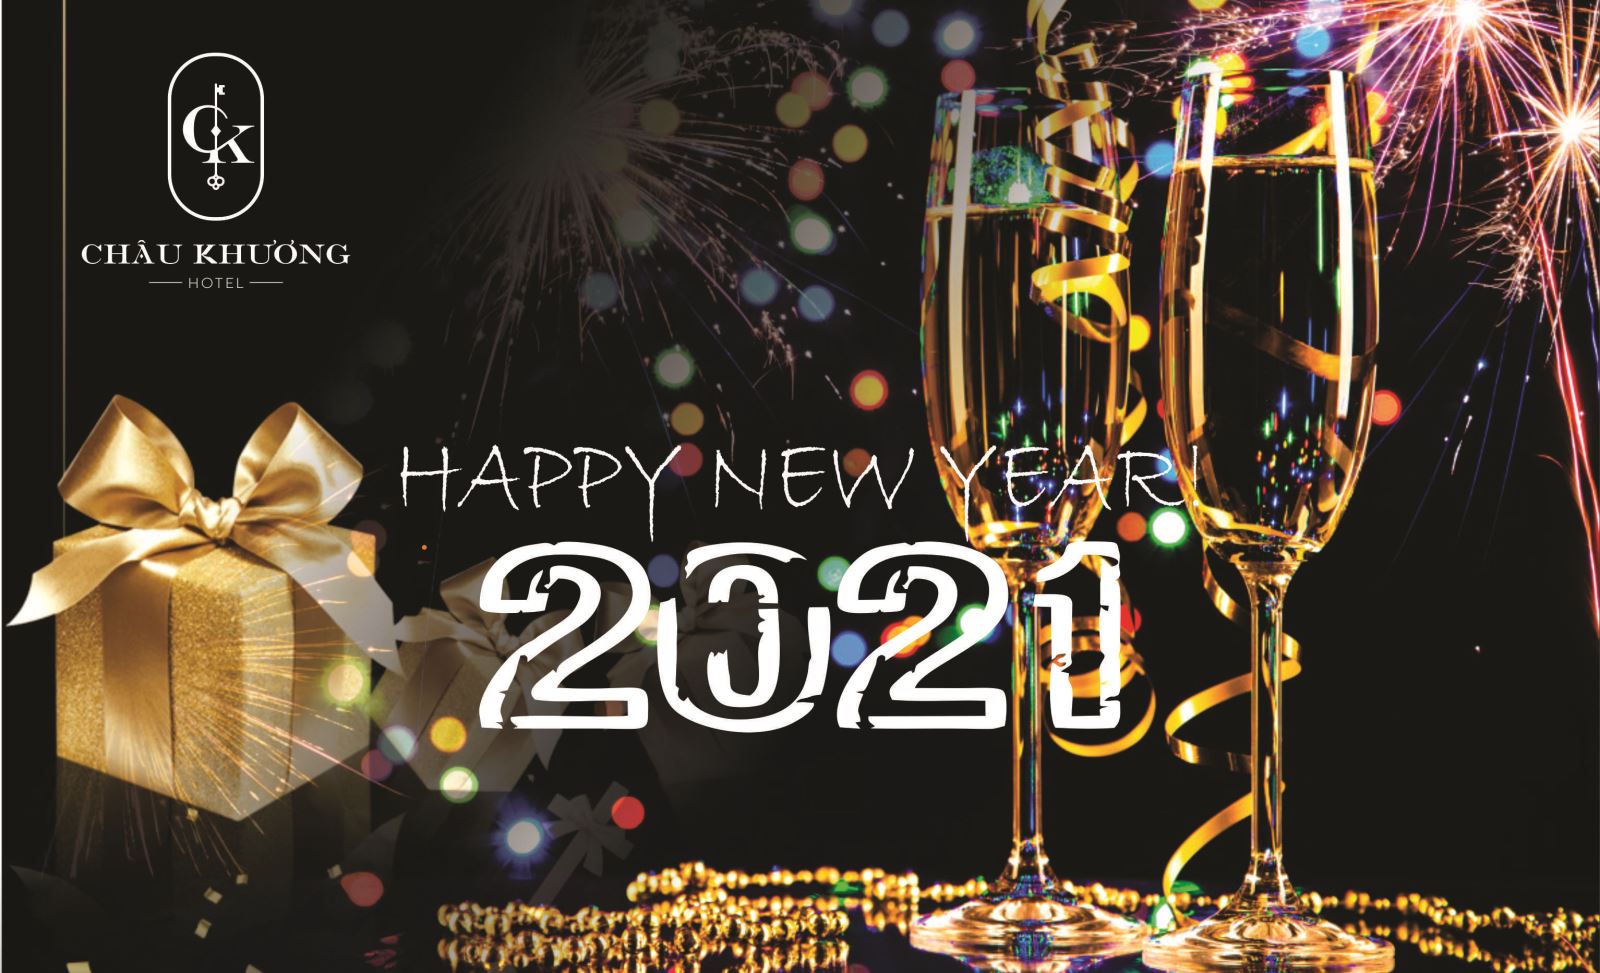 Chau Khuong Hotel Welcome The New Year 2021